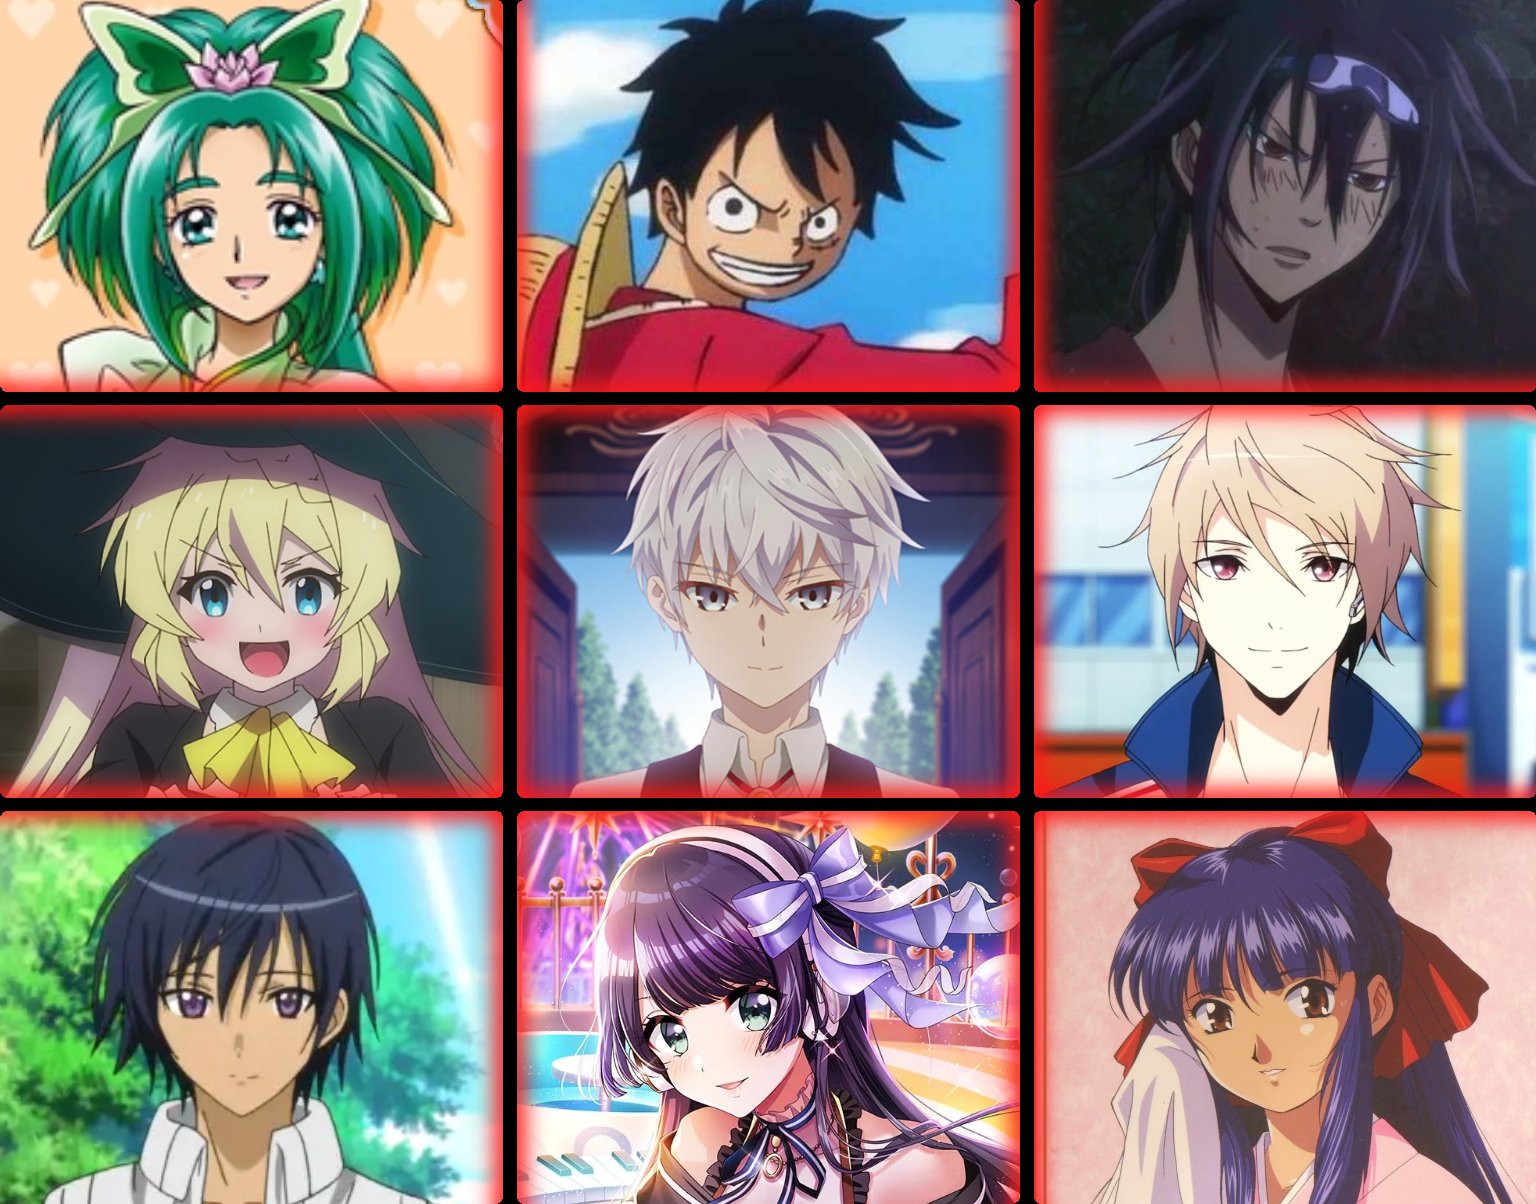 Guess the Anime by picture v.2 (1999-2019) Quiz - By UnknownCreator